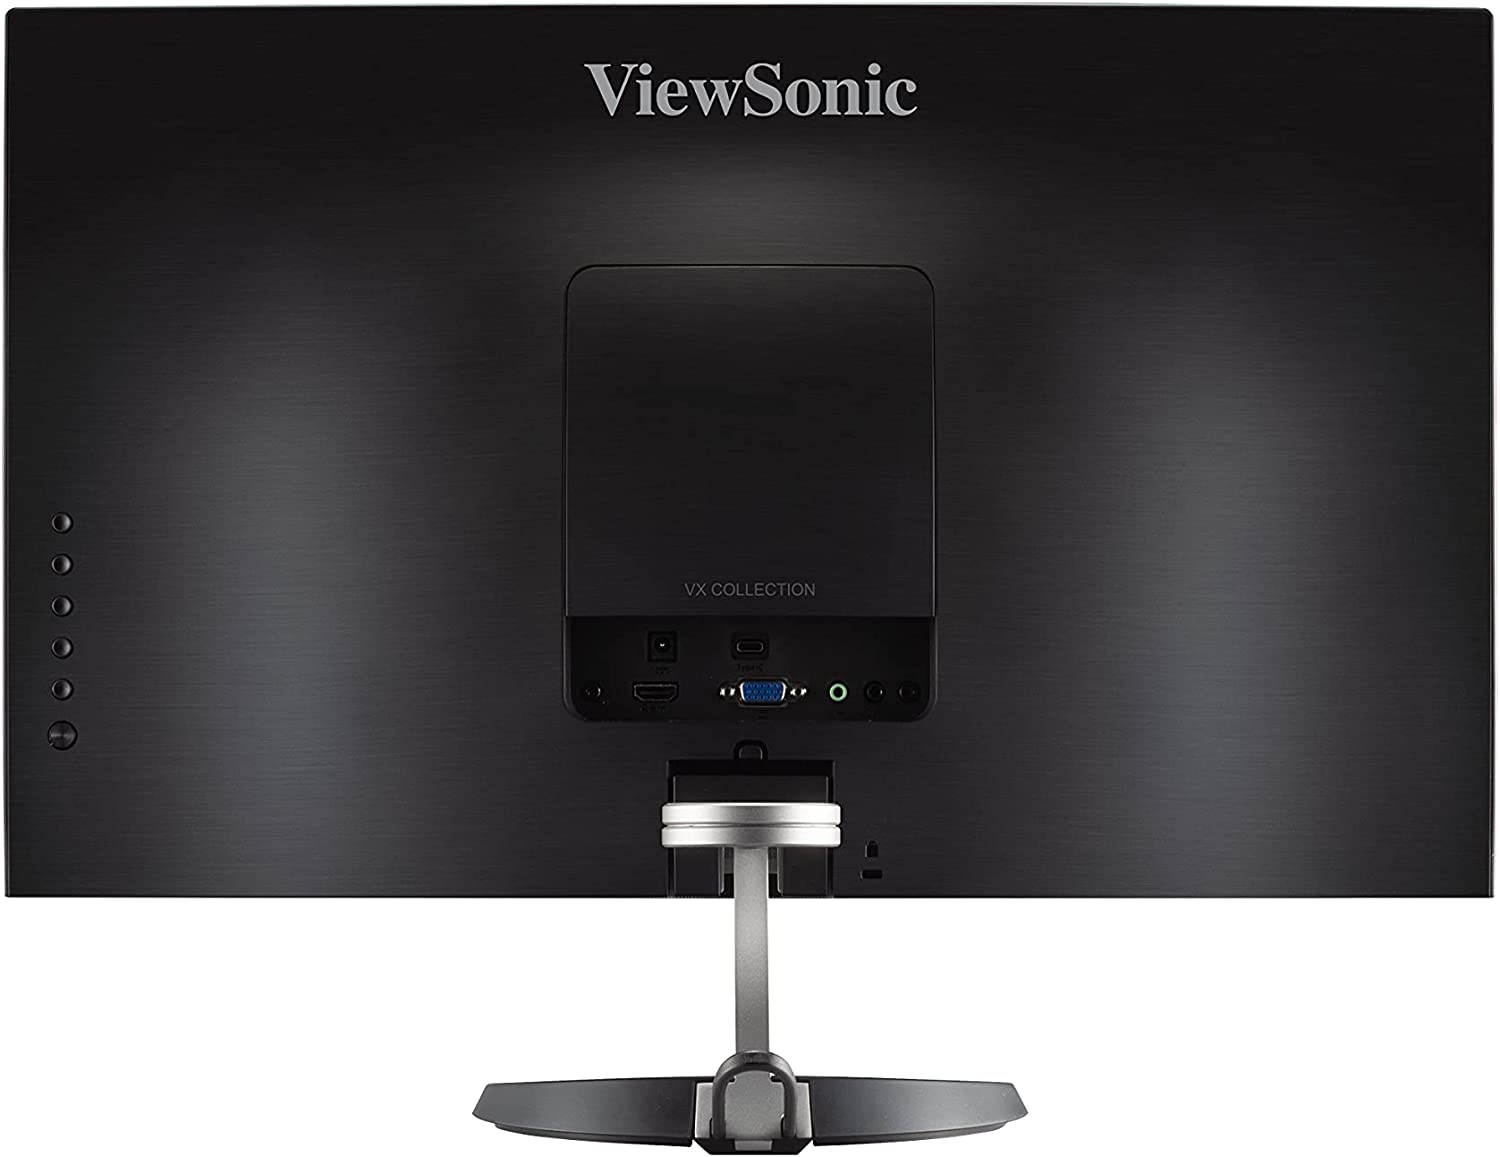 ViewSonic VX2485-MHU-S 24" 1080p USB 3.2 Type C and FreeSync Home and Office IPS Monitor - Certified Refurbished